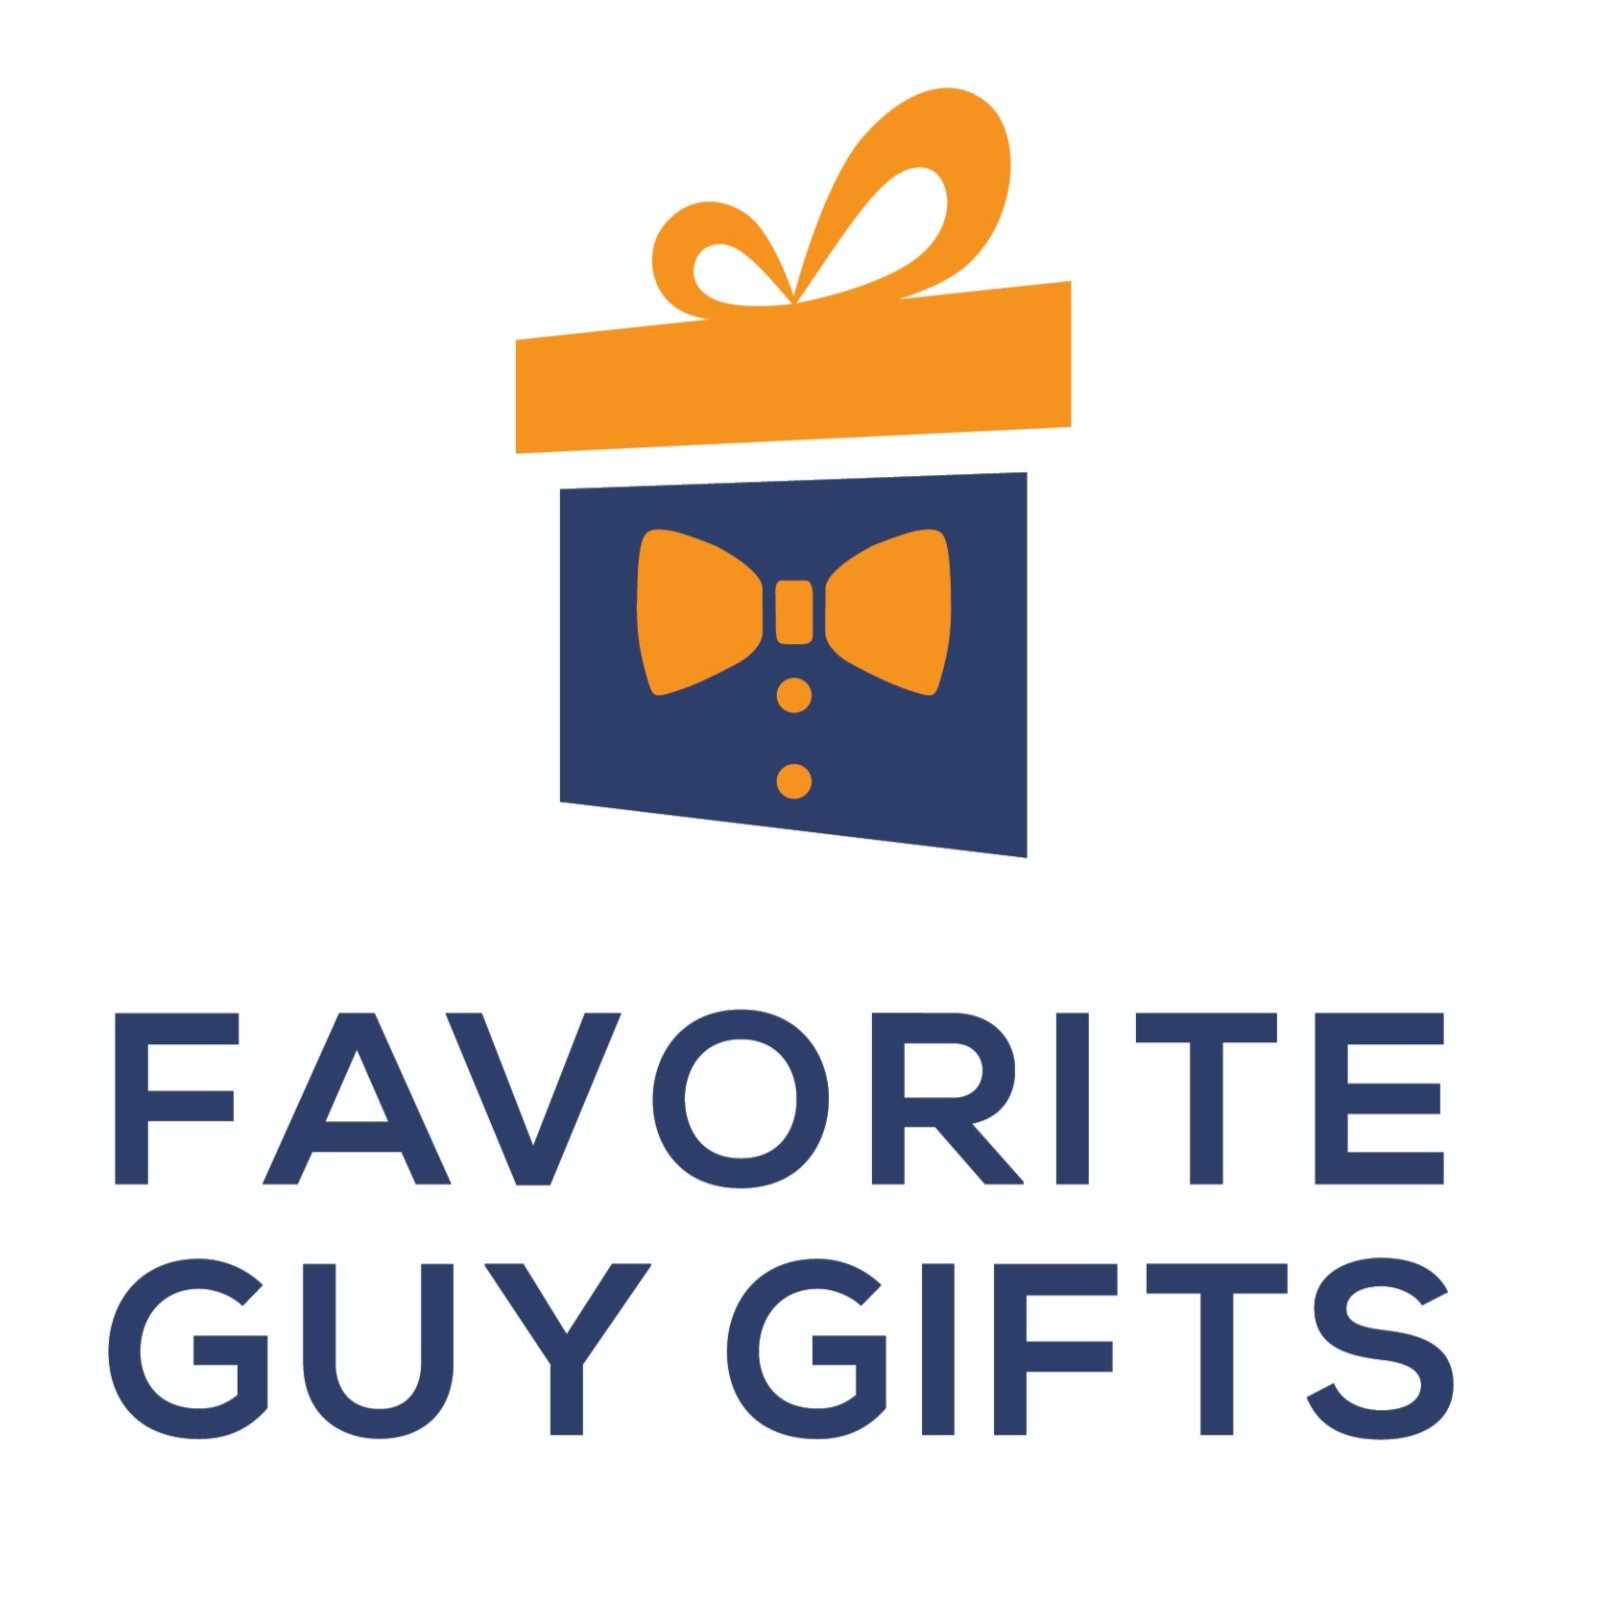 Favorite Guy Gifts - Calibrate Digital Marketing Client - Advertising Agency Springfield Missouri